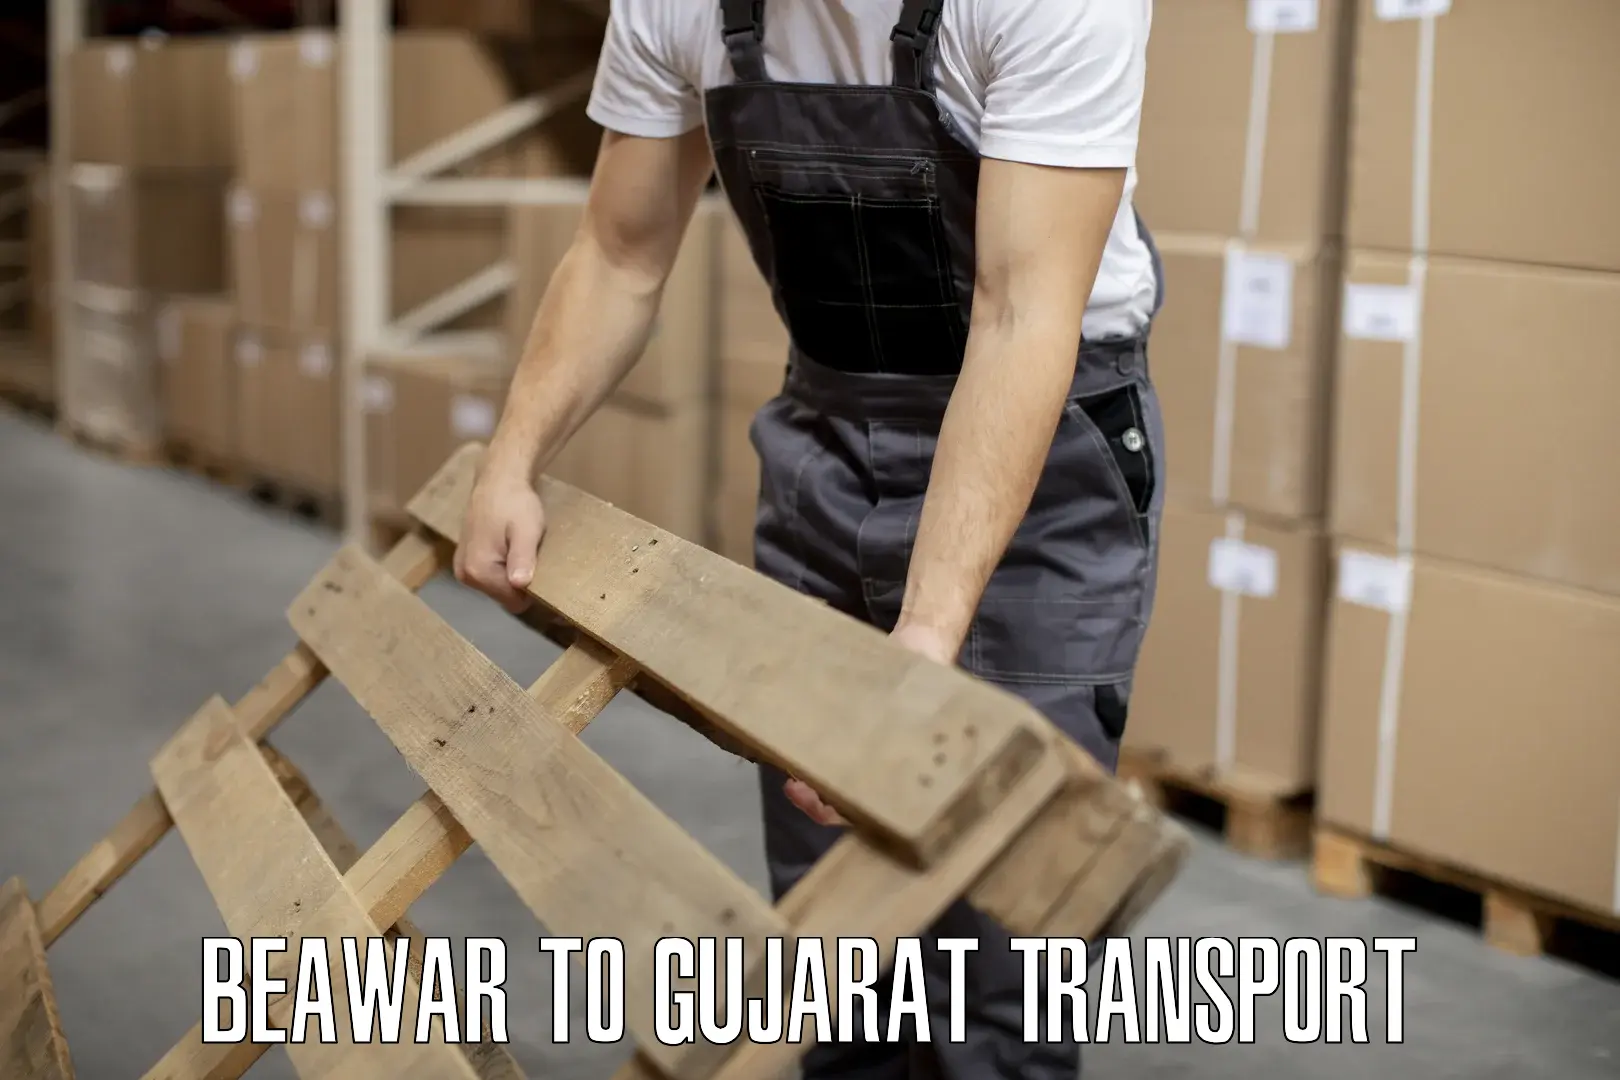 Domestic transport services Beawar to GIDC